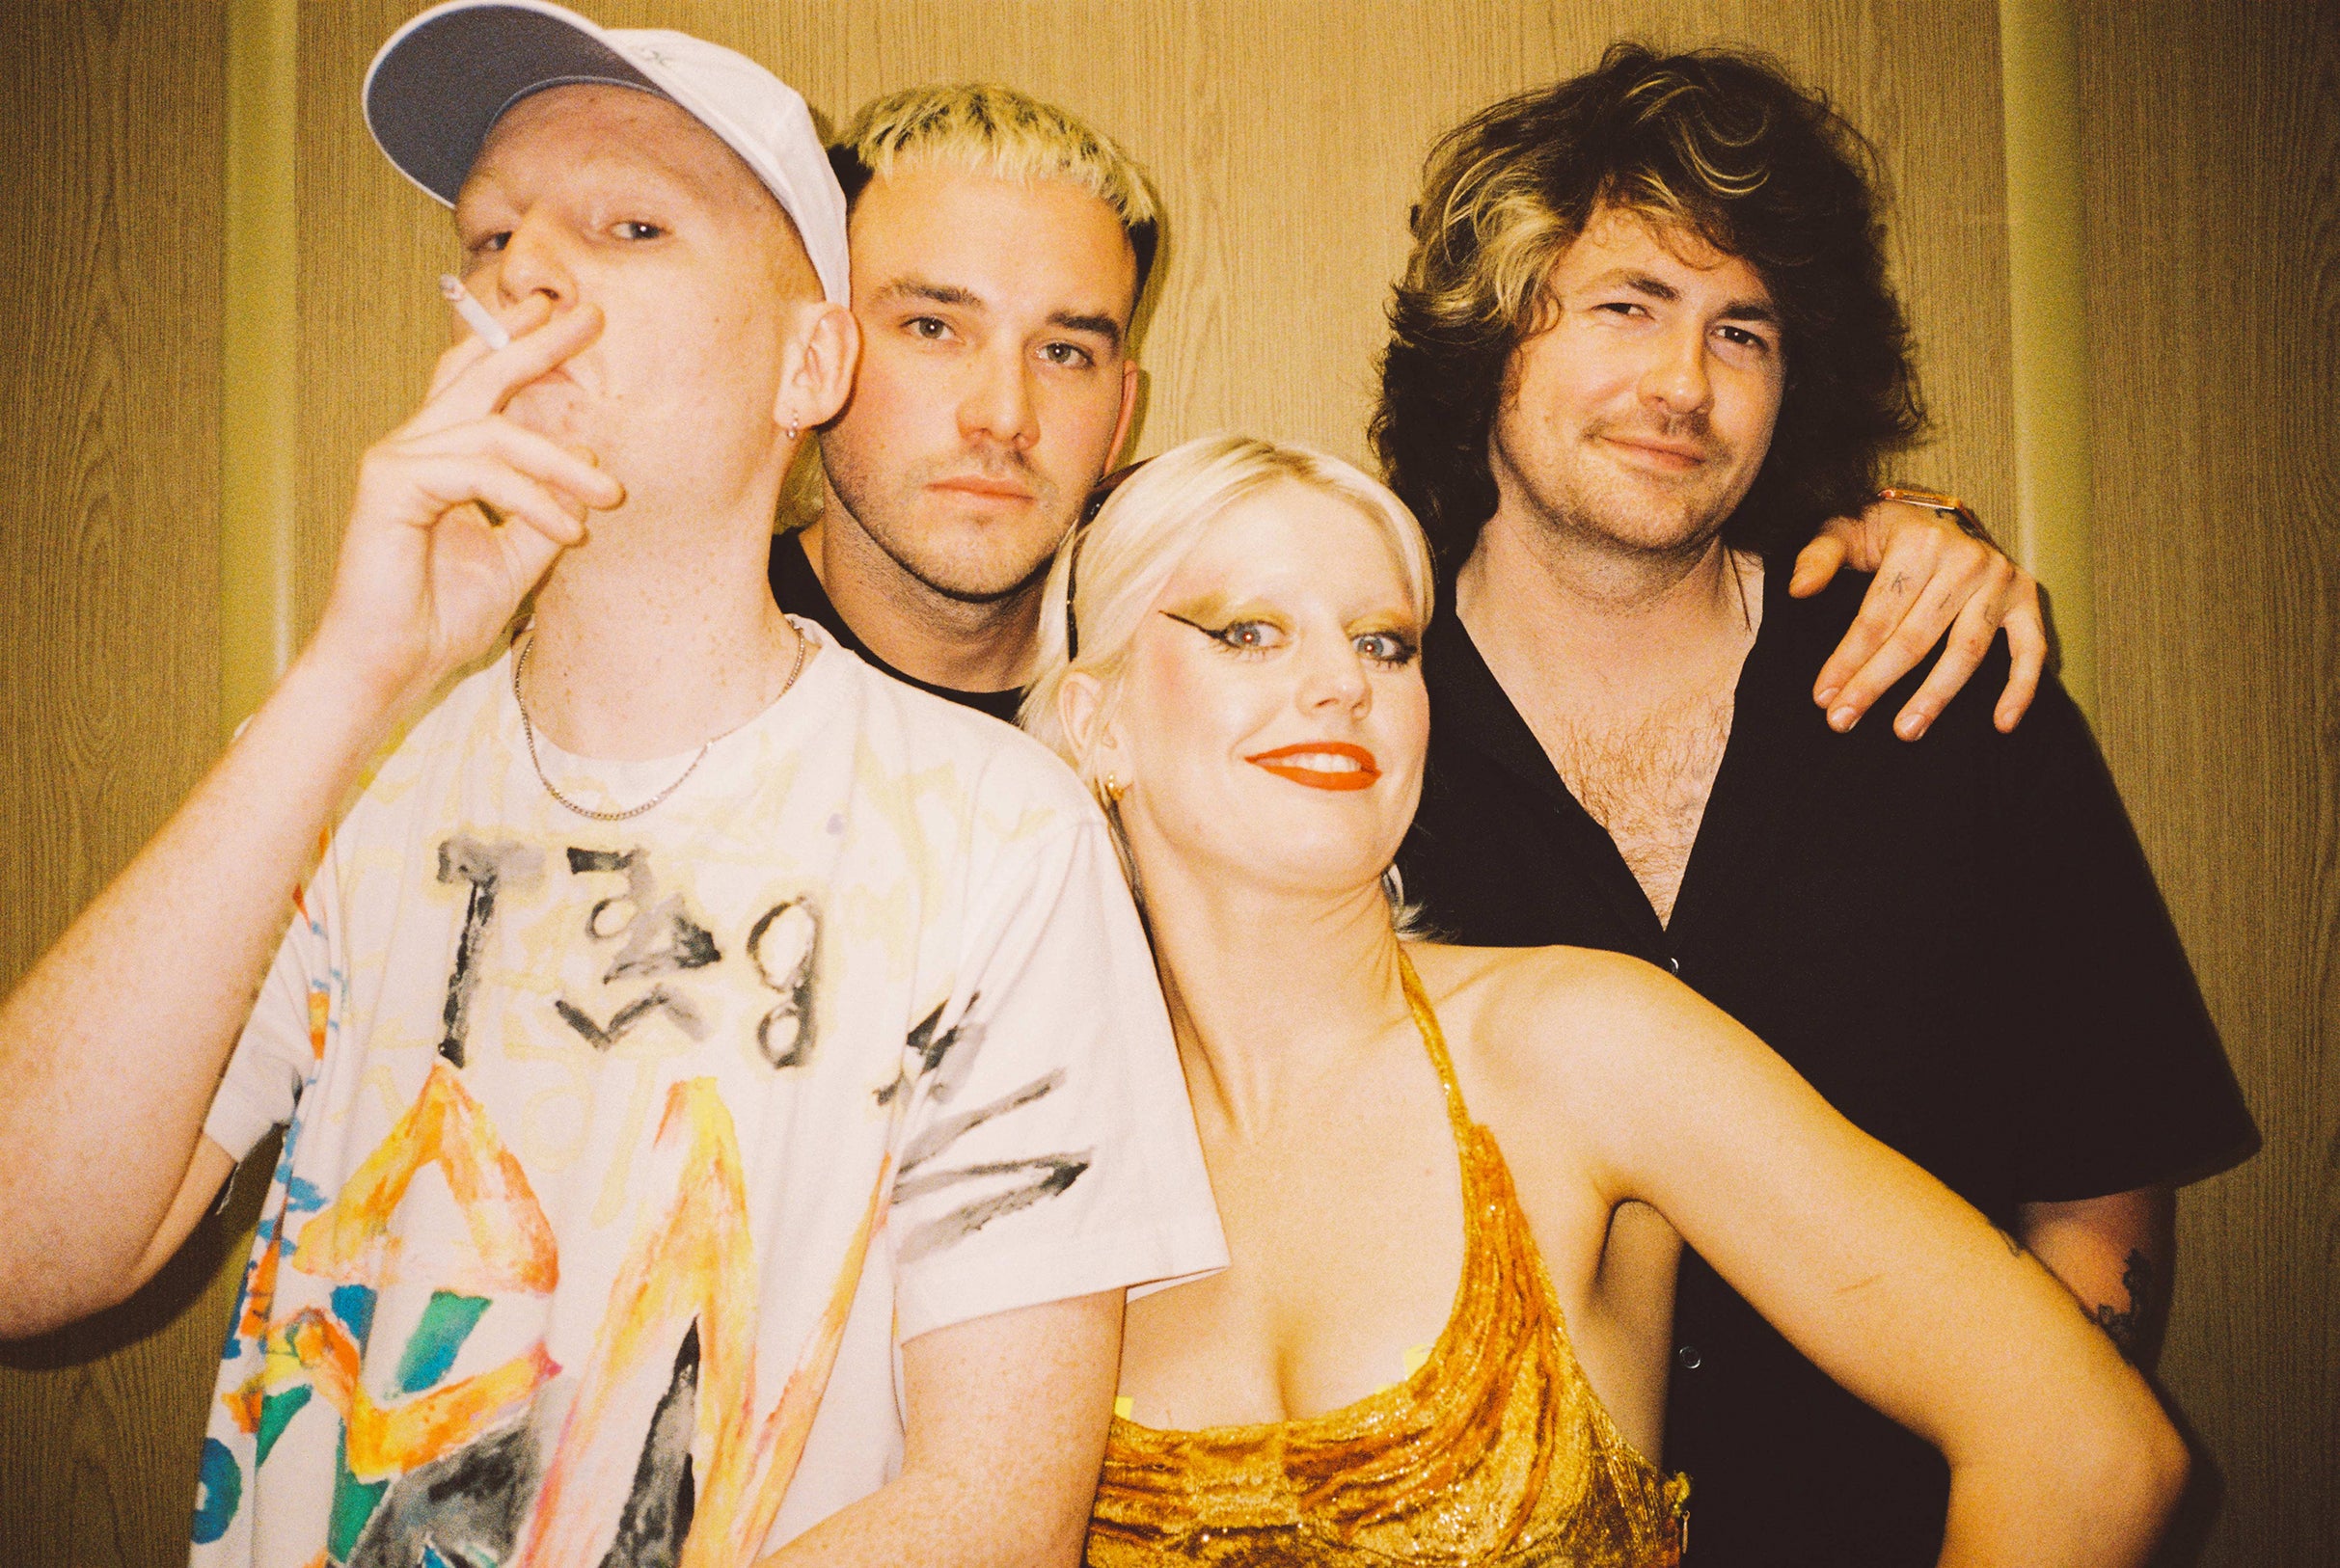 Amyl and the Sniffers at Mercury Ballroom